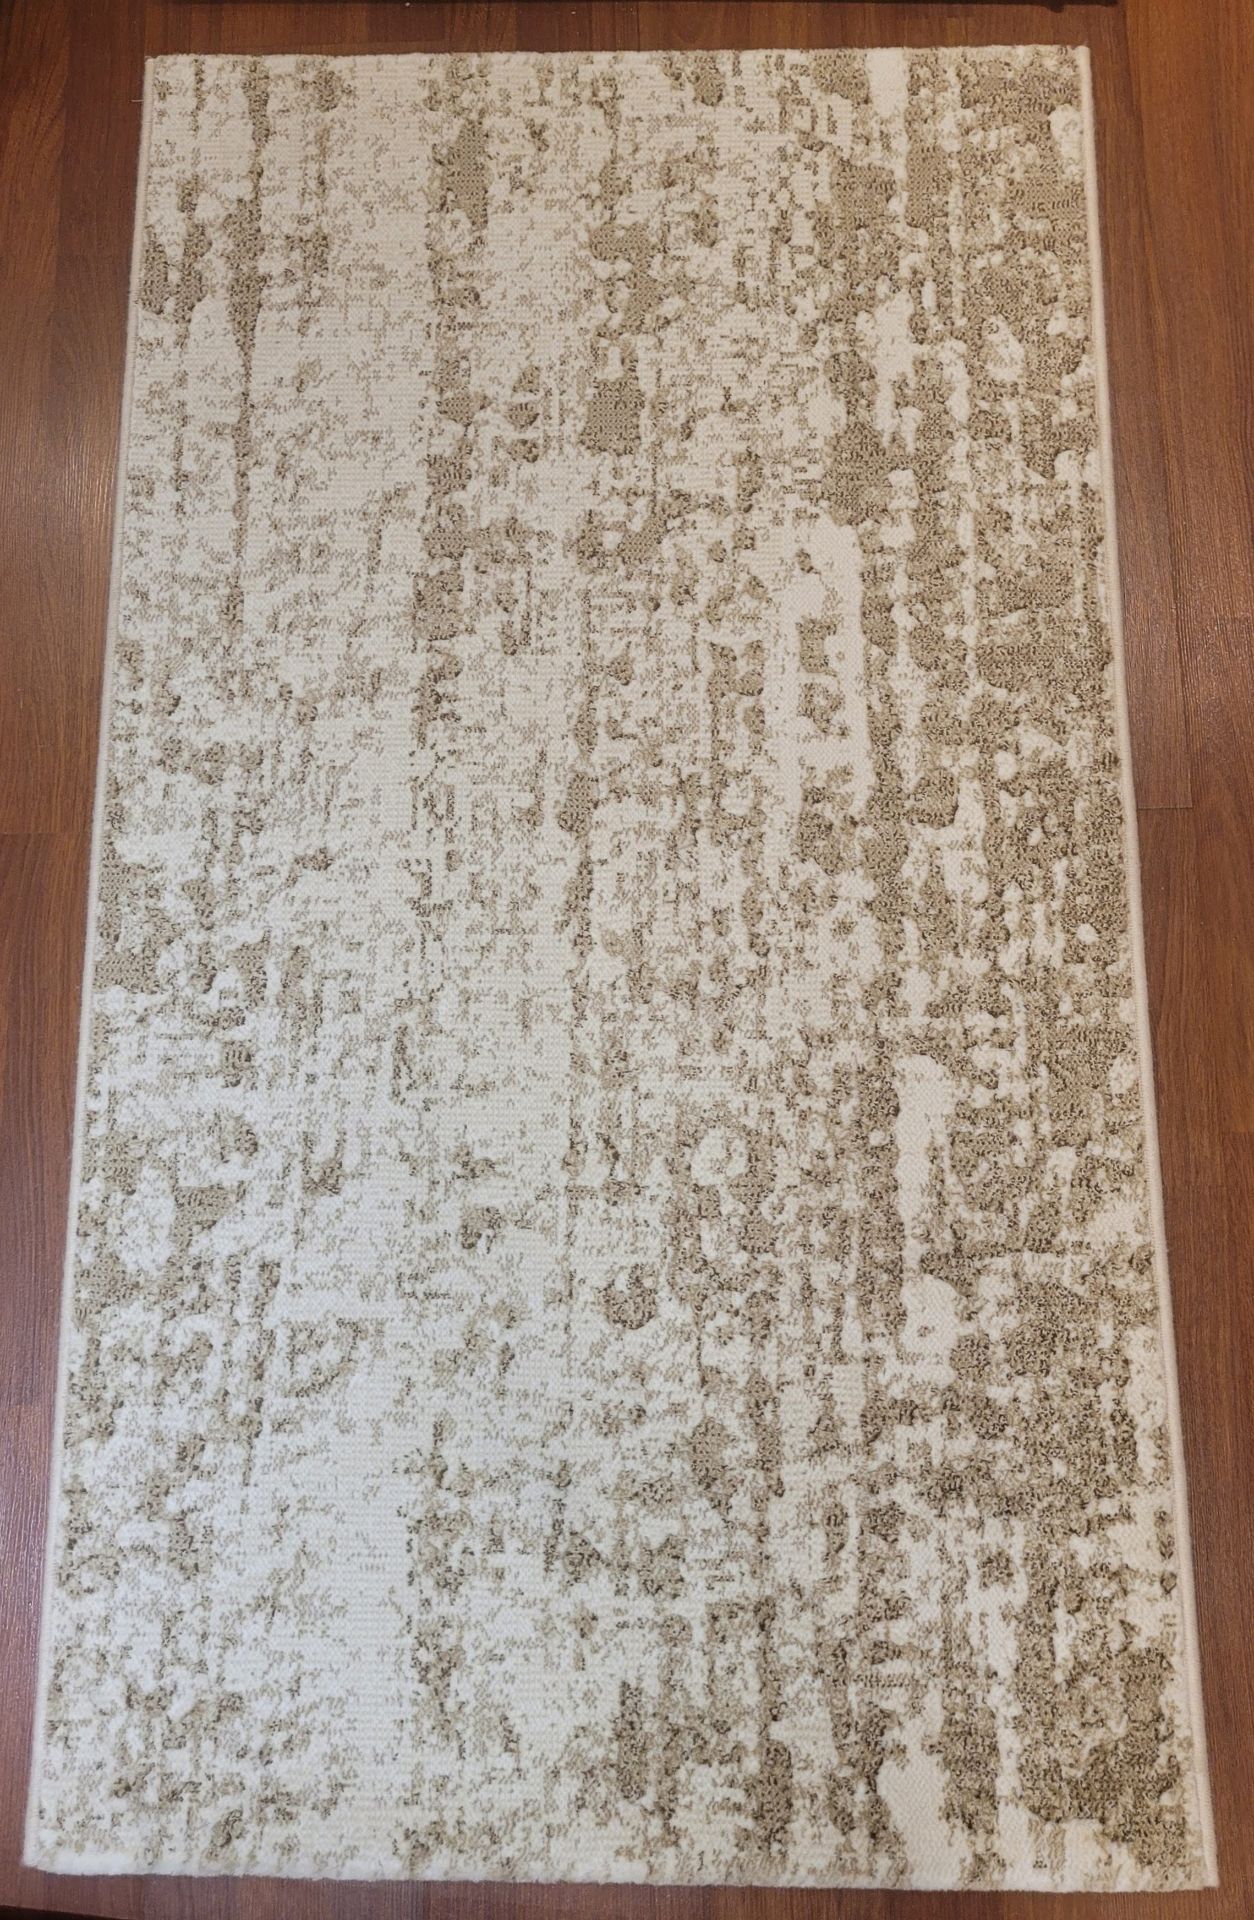 2'5" X 4'5" NAXOS MADE IN BELGIUM - MSRP $267.00 EA. (LOCATED IN WALL-TO-WALL) INVENTORY CODE: 12-28